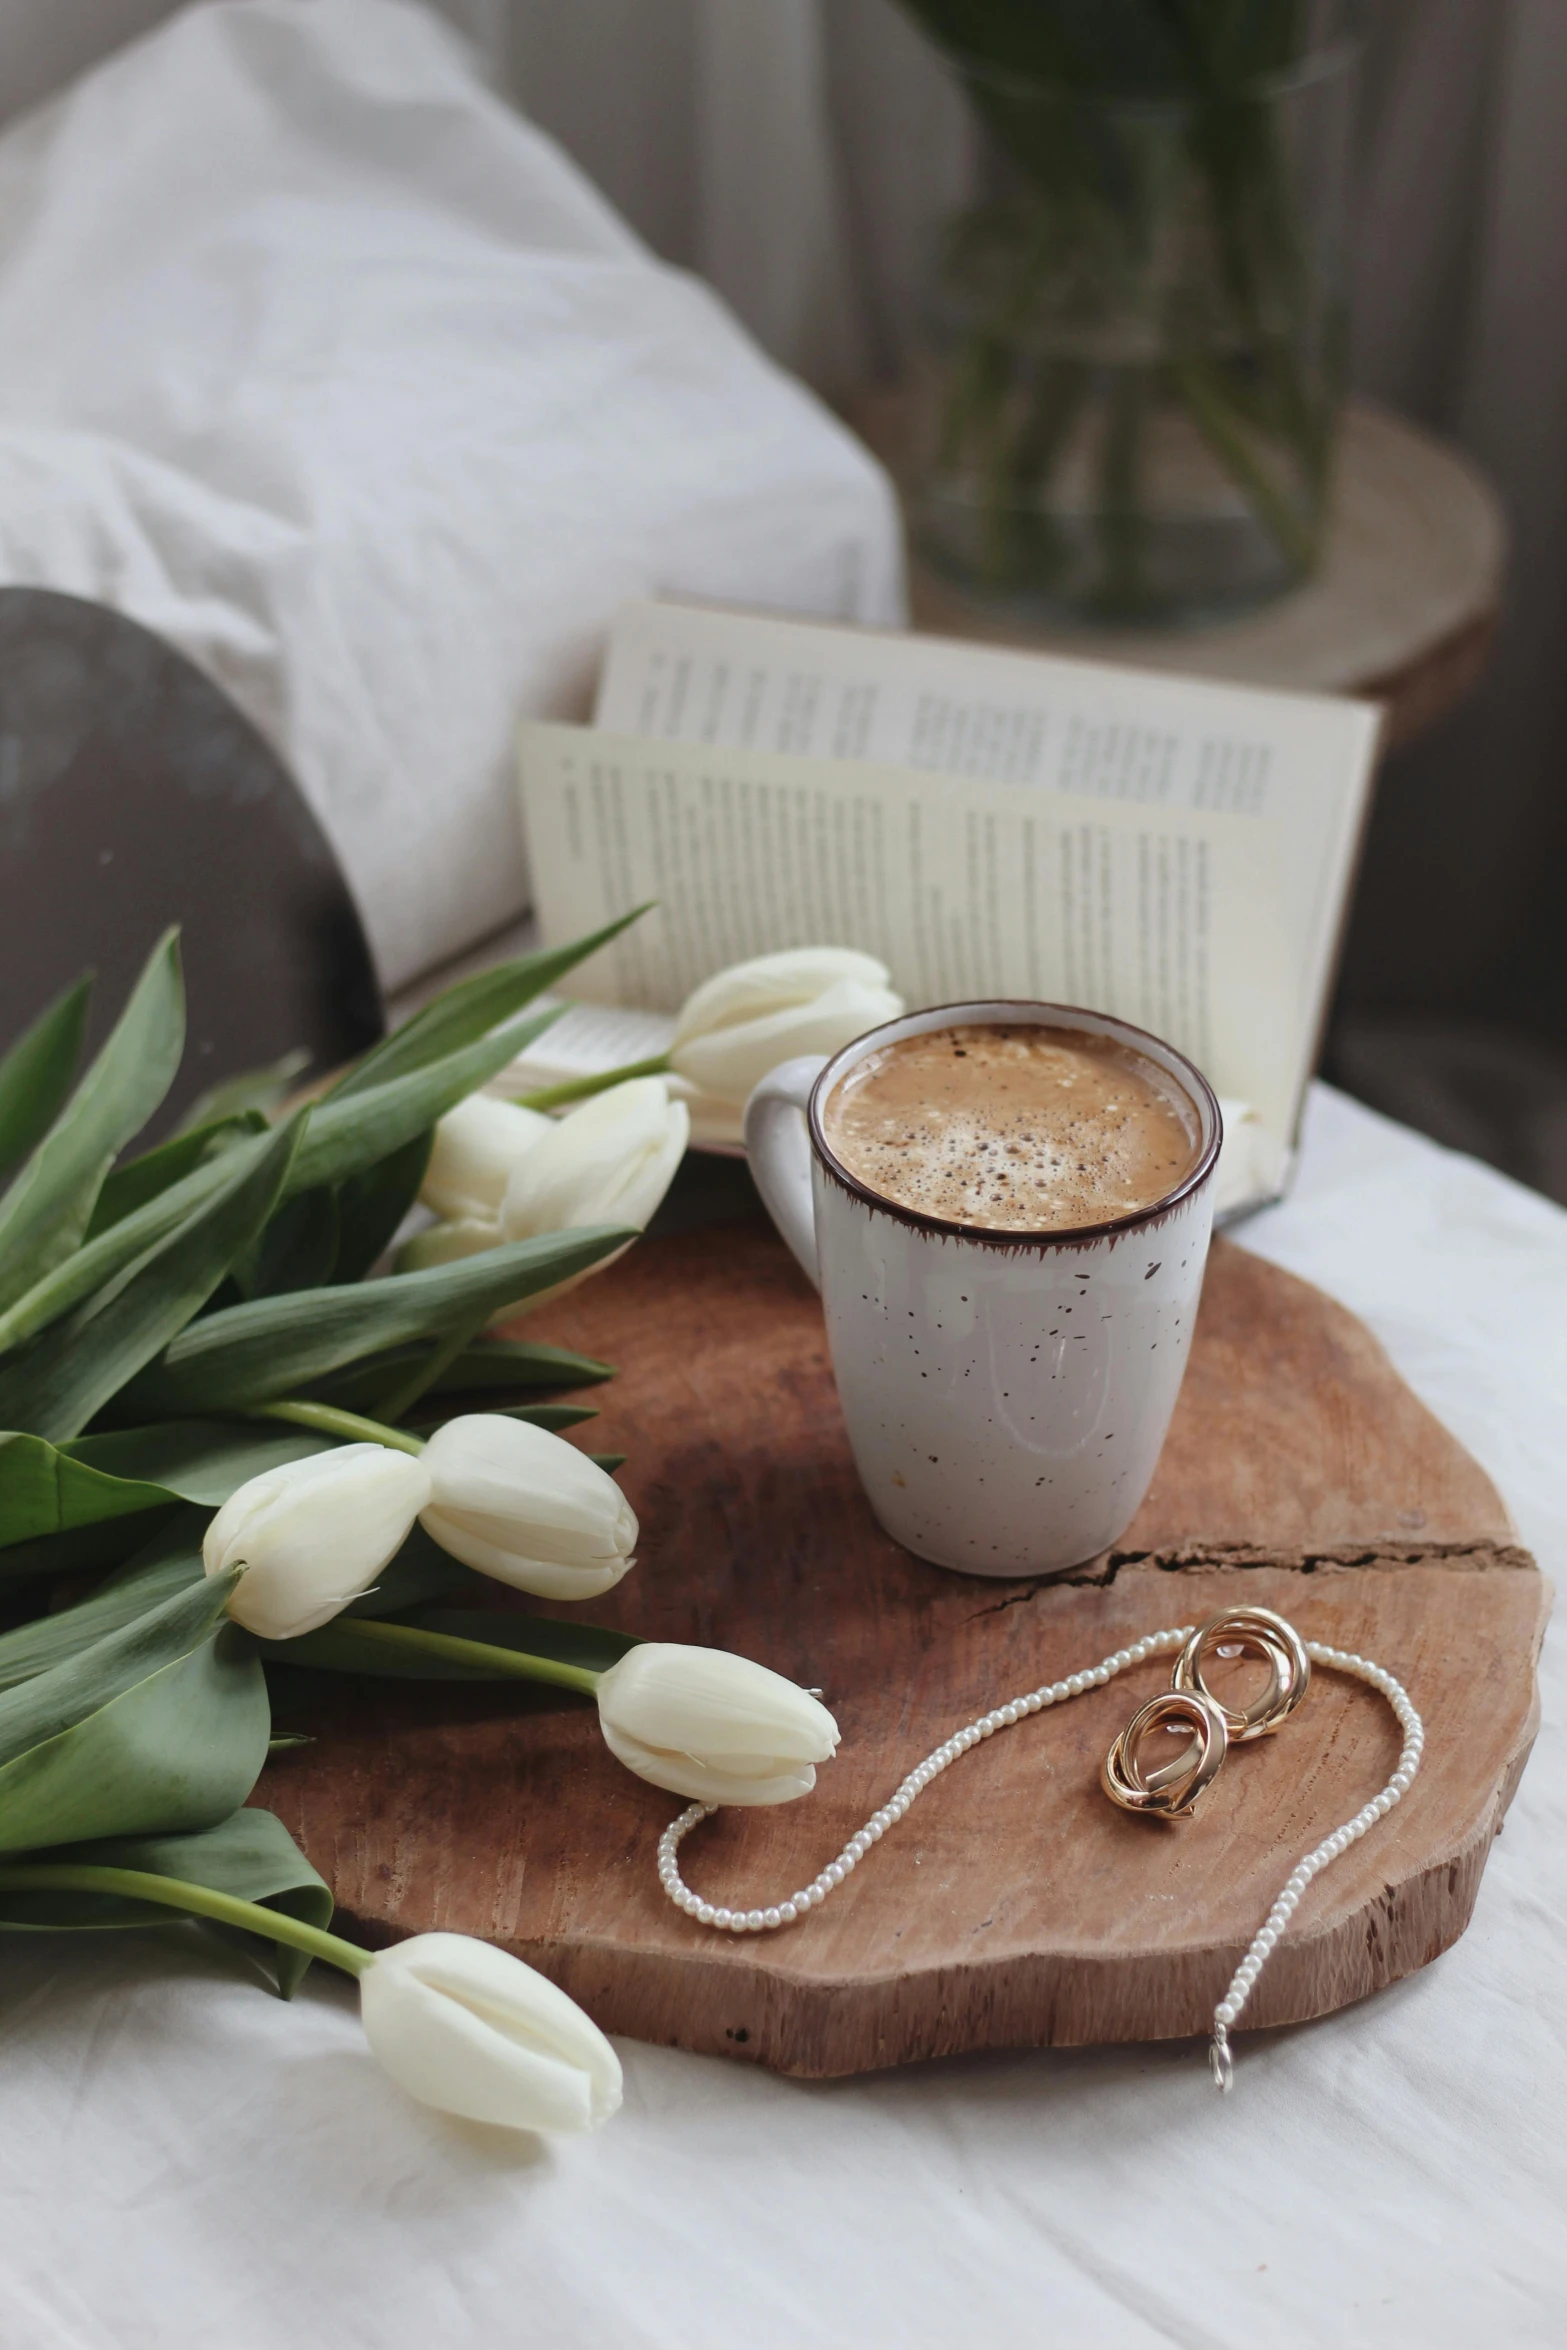 a bouquet of white tulips next to a cup of coffee, trending on pexels, romanticism, wooden jewerly, storybook style, coffee stain, cozy bed